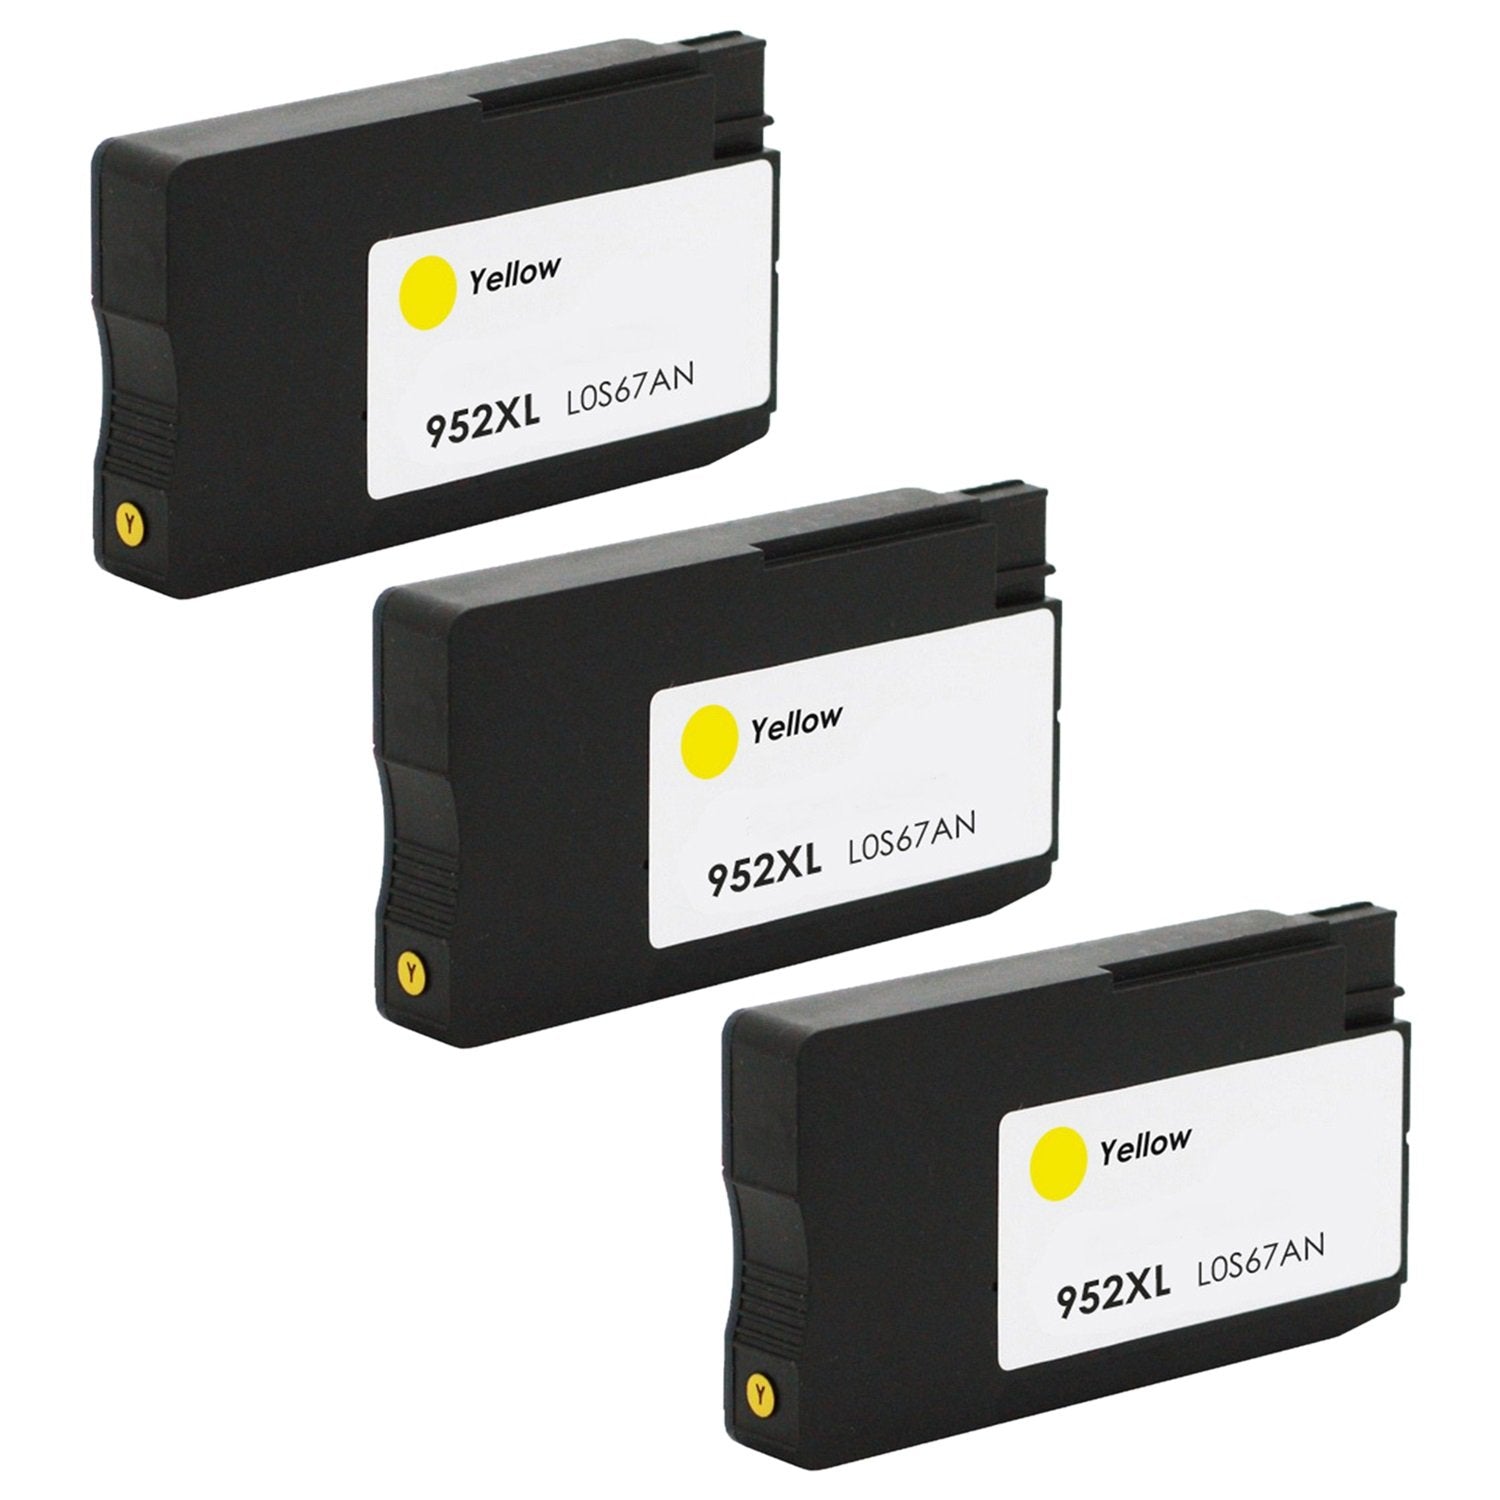 Absolute Toner Compatible L0S67AN HP 952XL Yellow High Yield Ink Cartridge | Absolute Toner HP Ink Cartridges